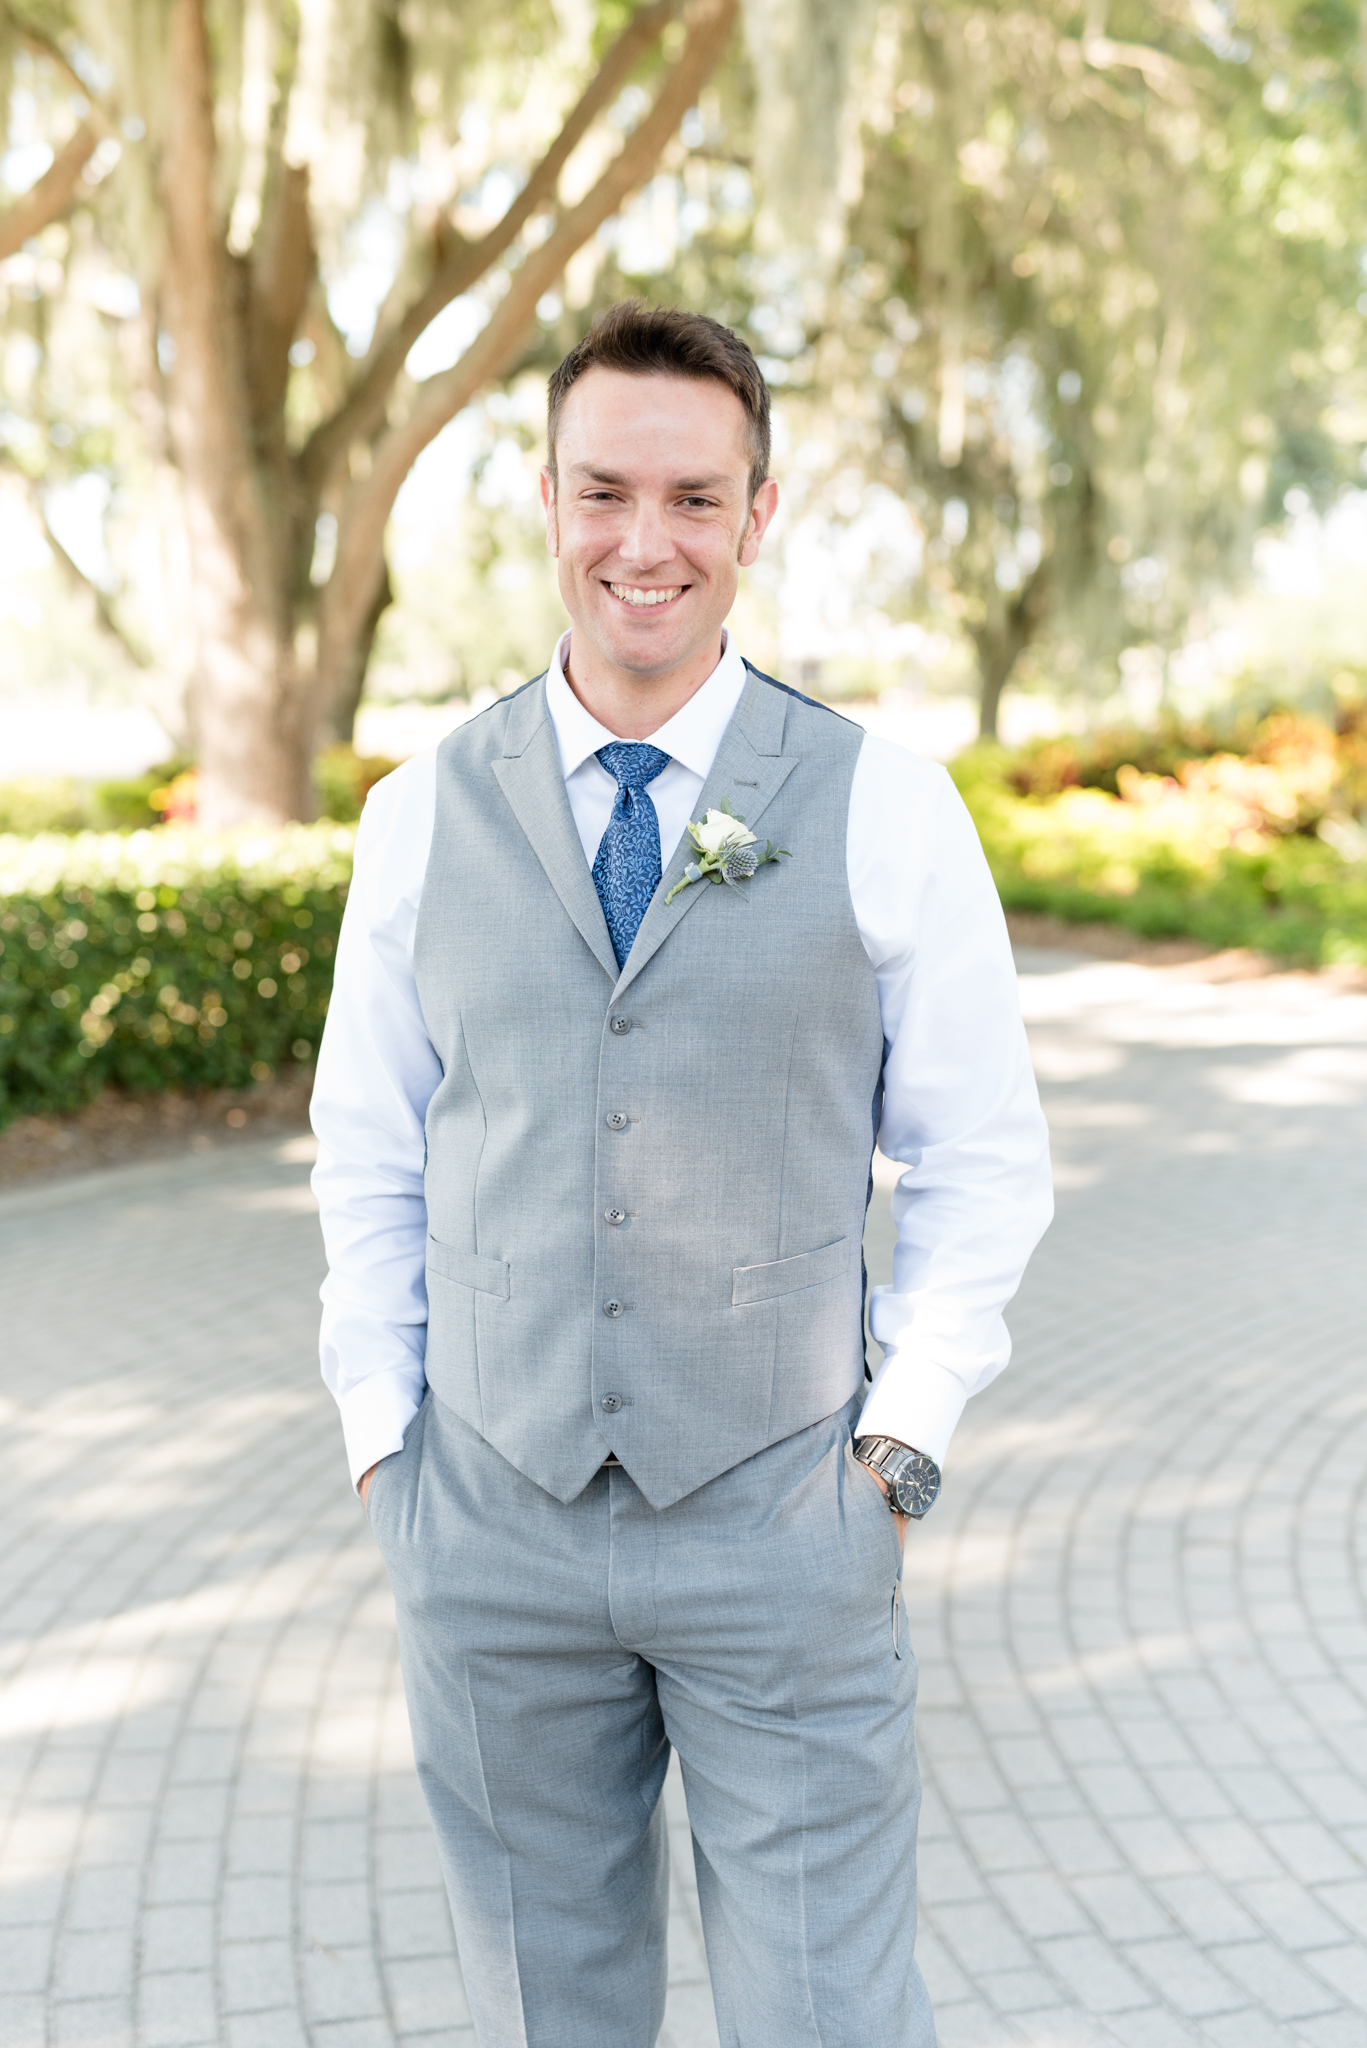 Groom smiles at camera during portraits.